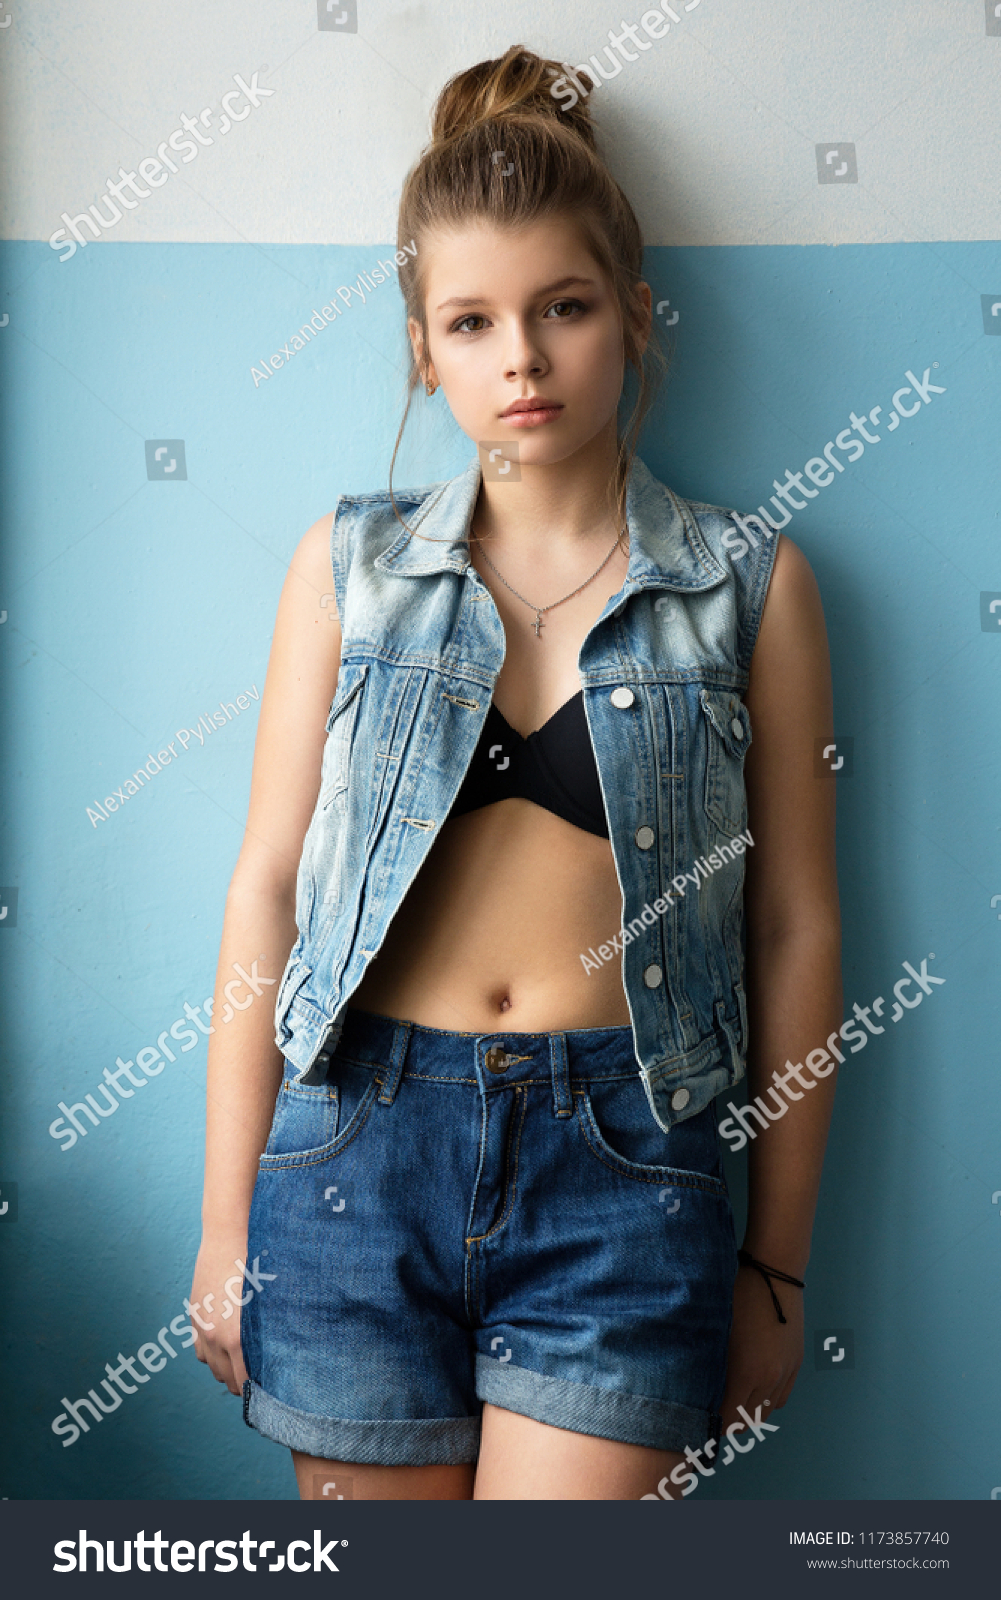 Teen In Jeans Pics